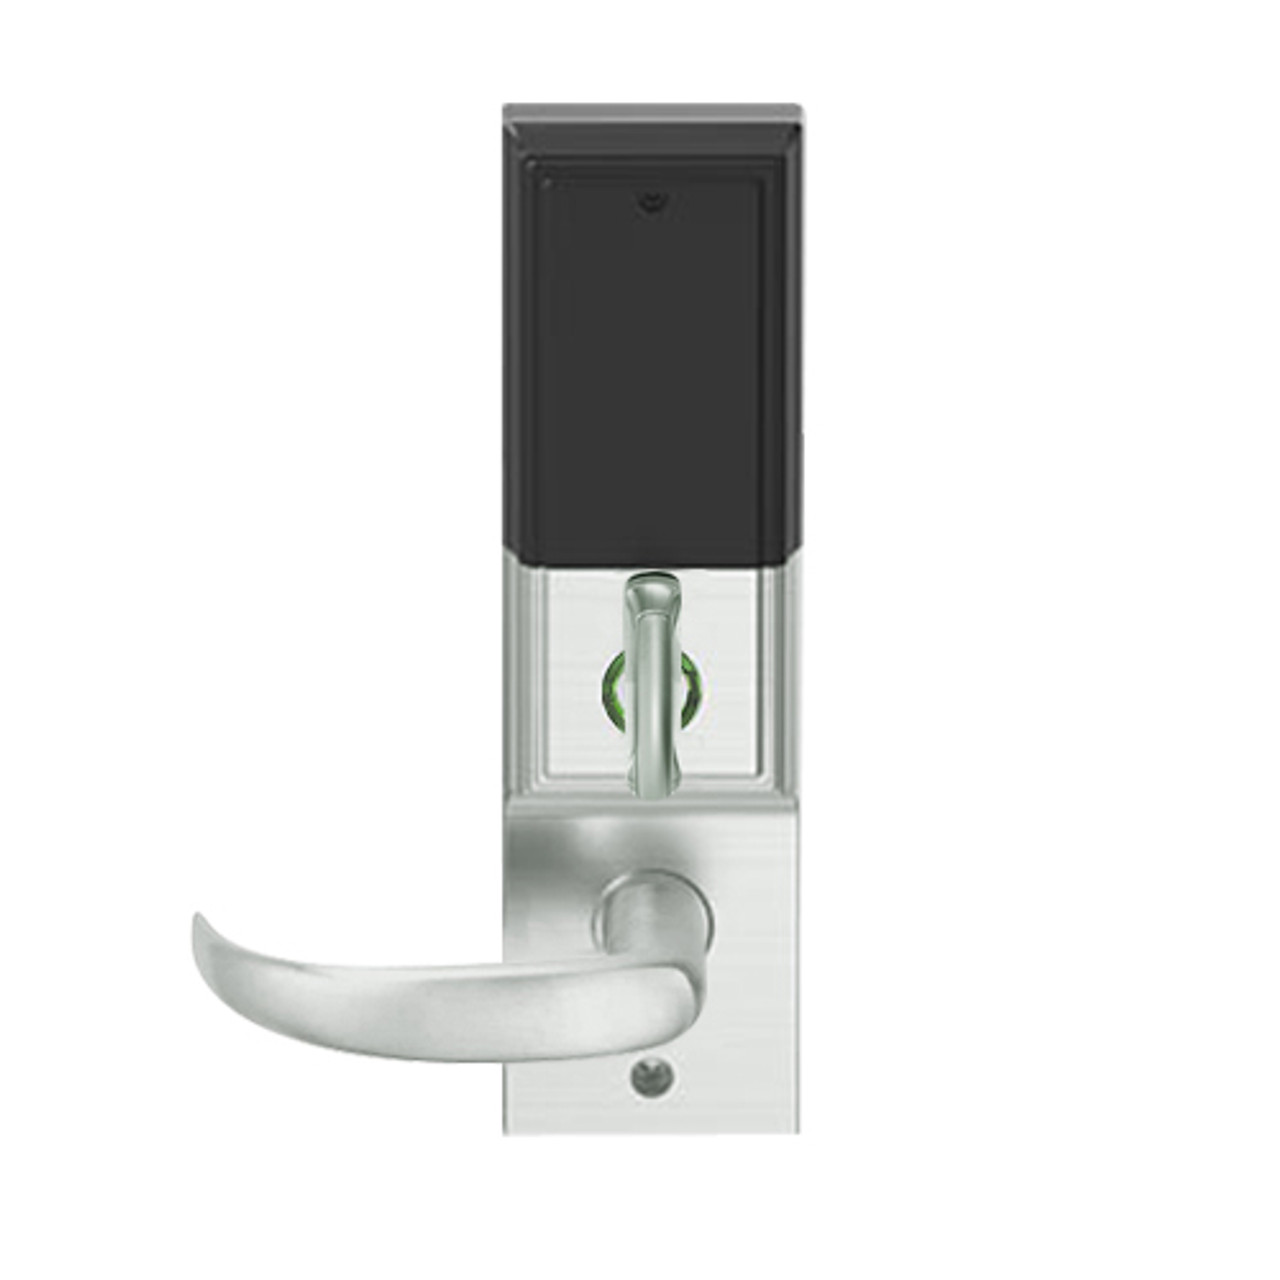 LEMD-ADD-BD-17-619 Schlage Privacy/Apartment Wireless Addison Mortise Deadbolt Lock with LED and Sparta Lever Prepped for SFIC in Satin Nickel